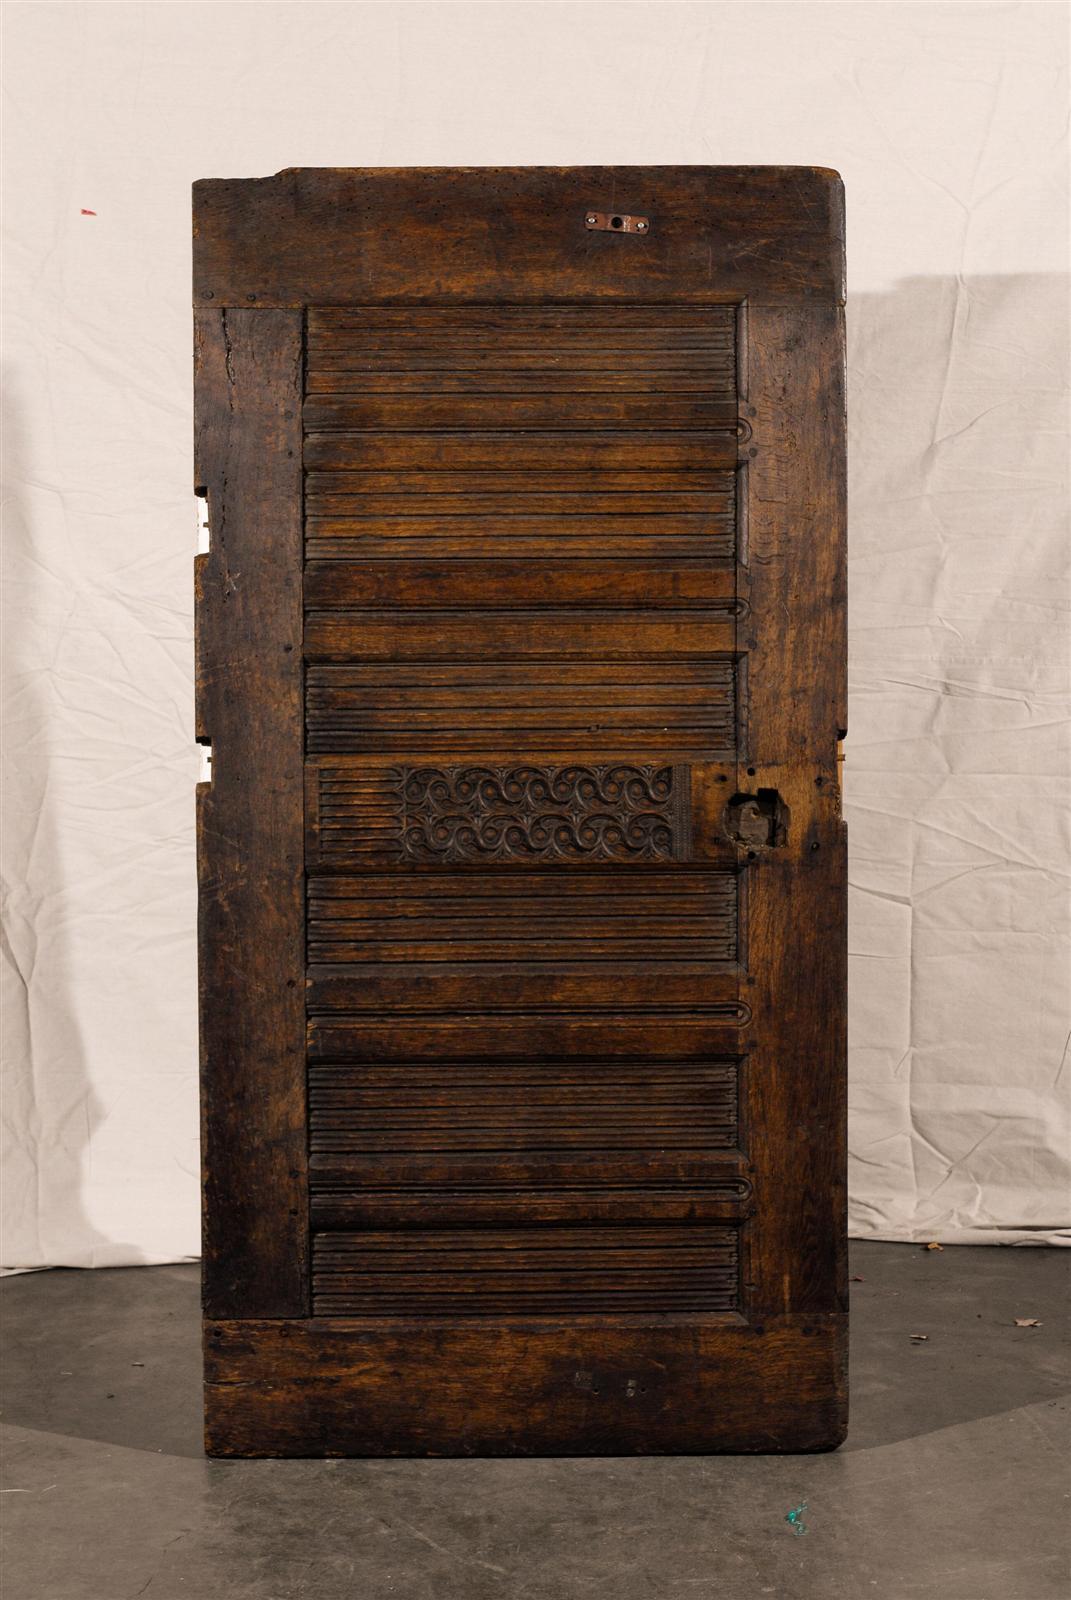 Early rare English door, circa 1750s
Would make an amazing tabletop.